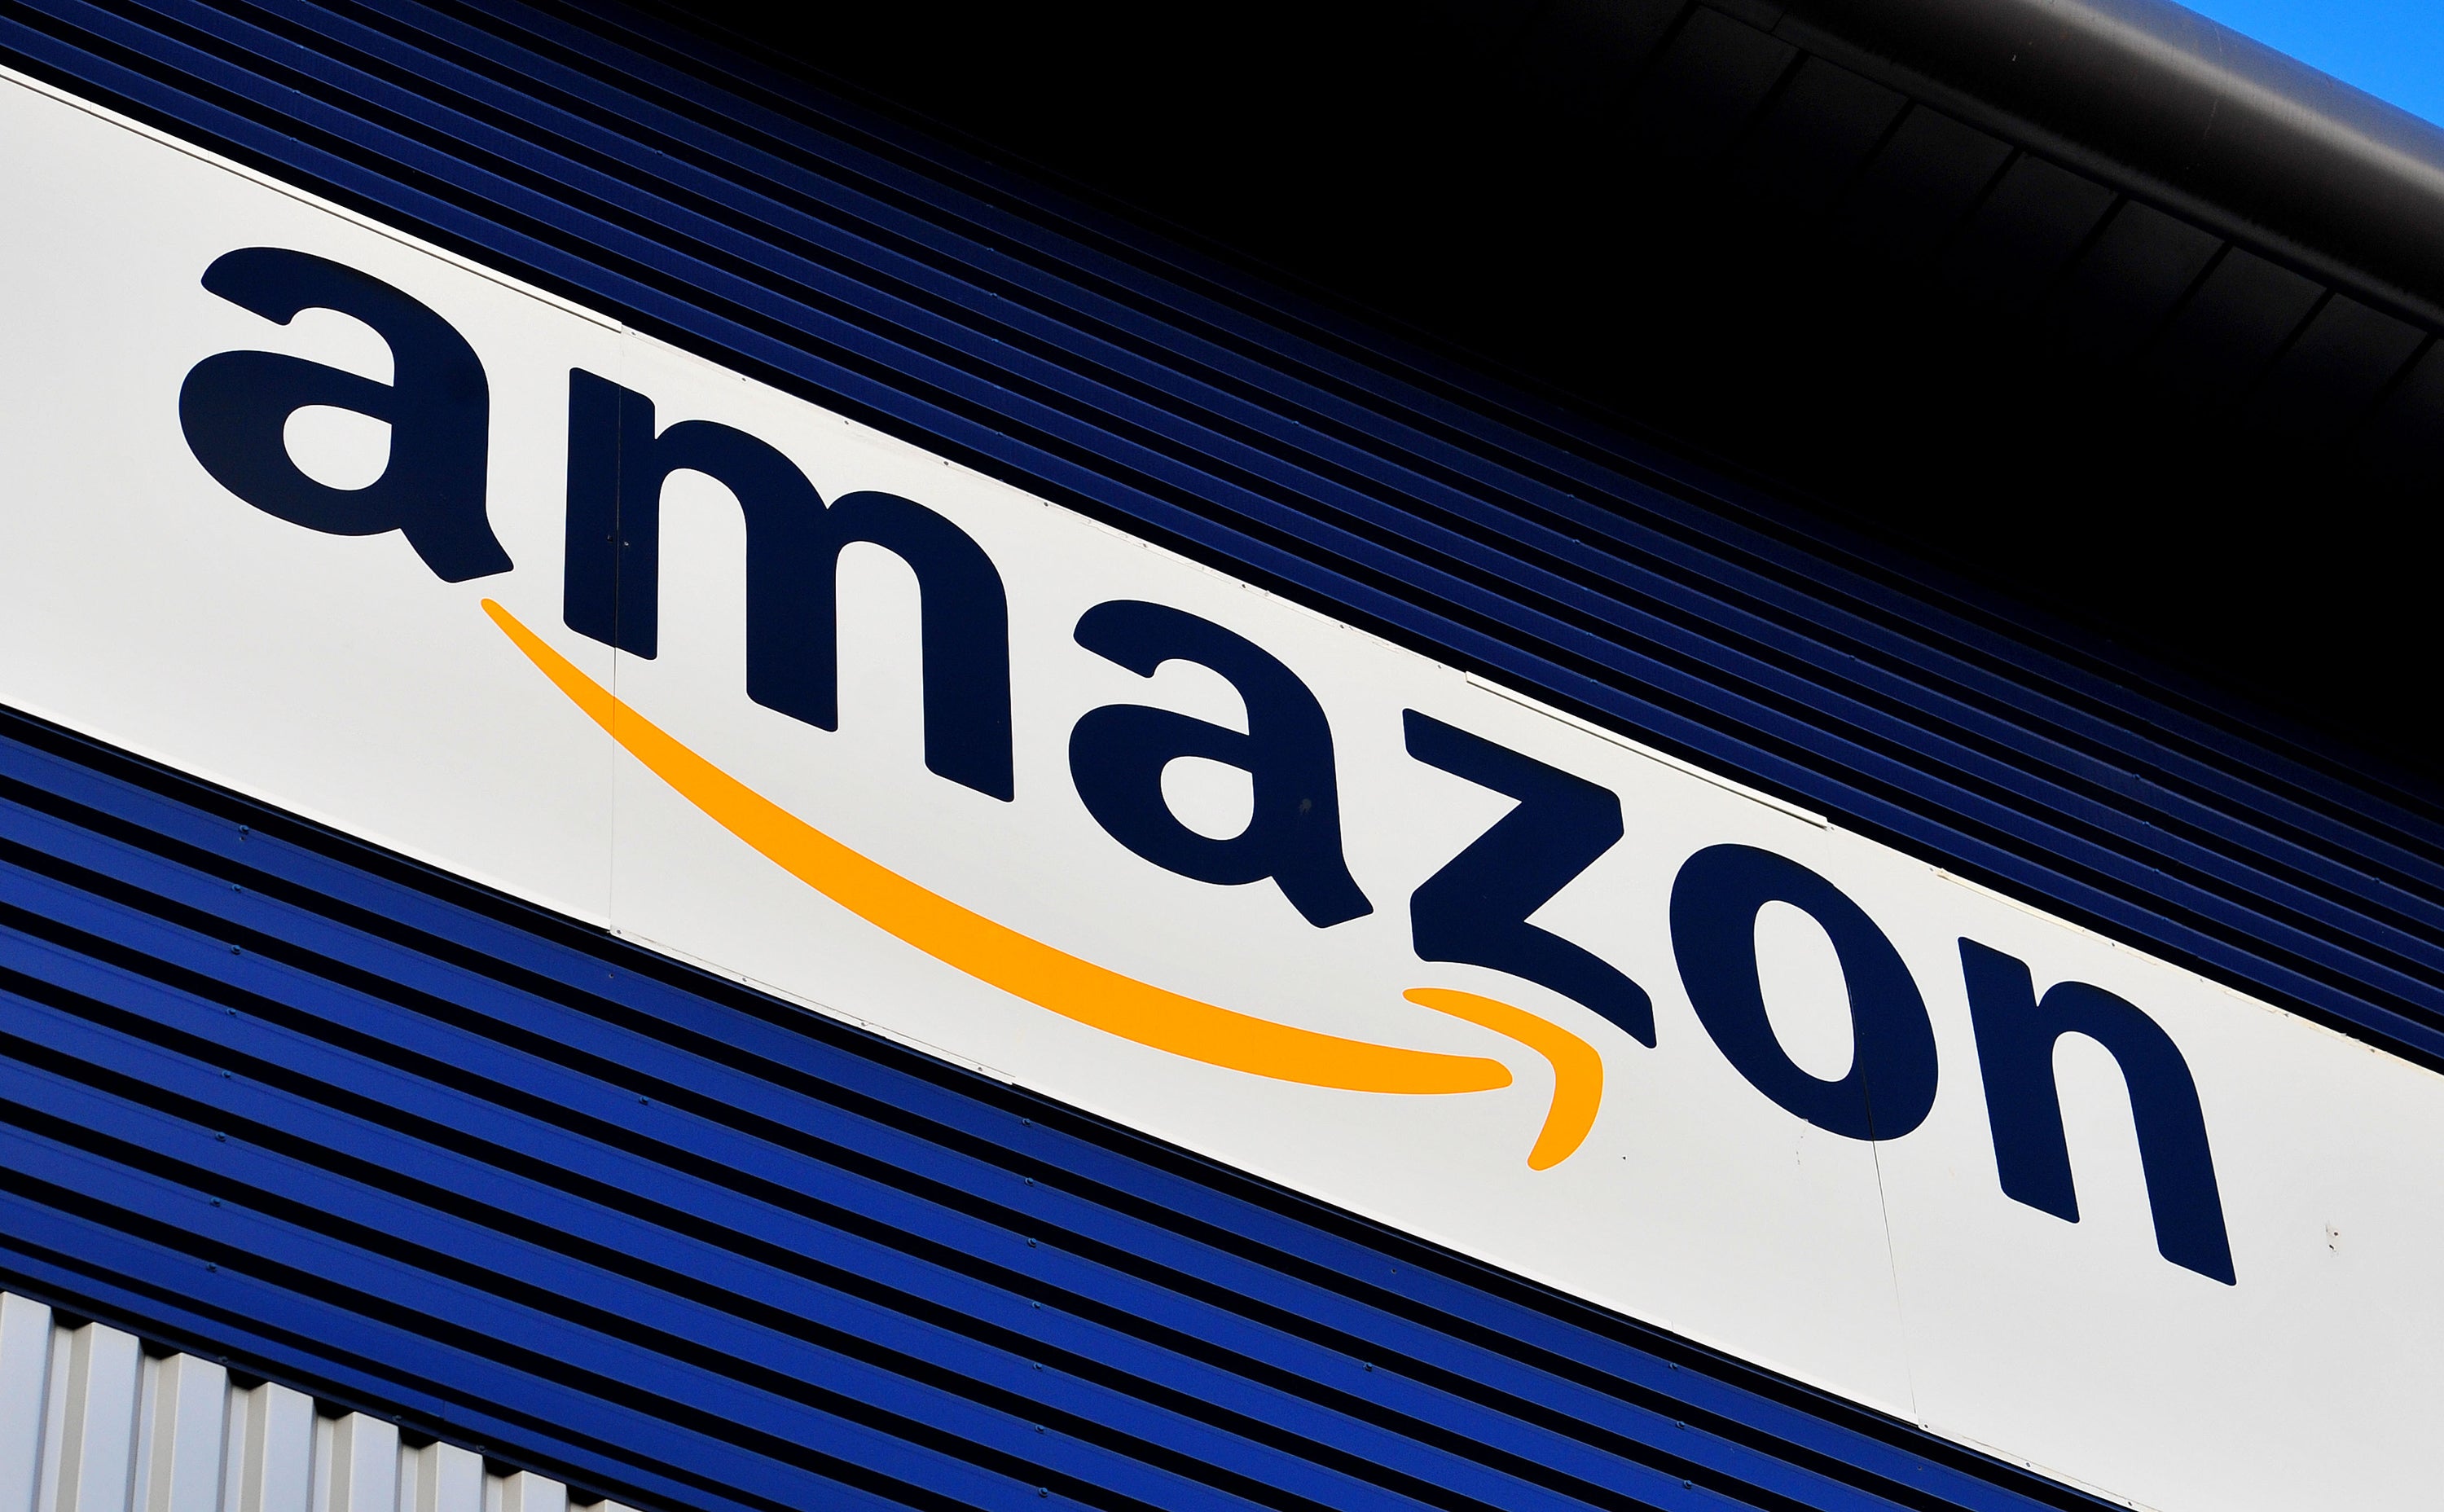 Amazon’s net income dropped to £2.3bn in the third quarter of 2021, compared to £6.3bn in 2020